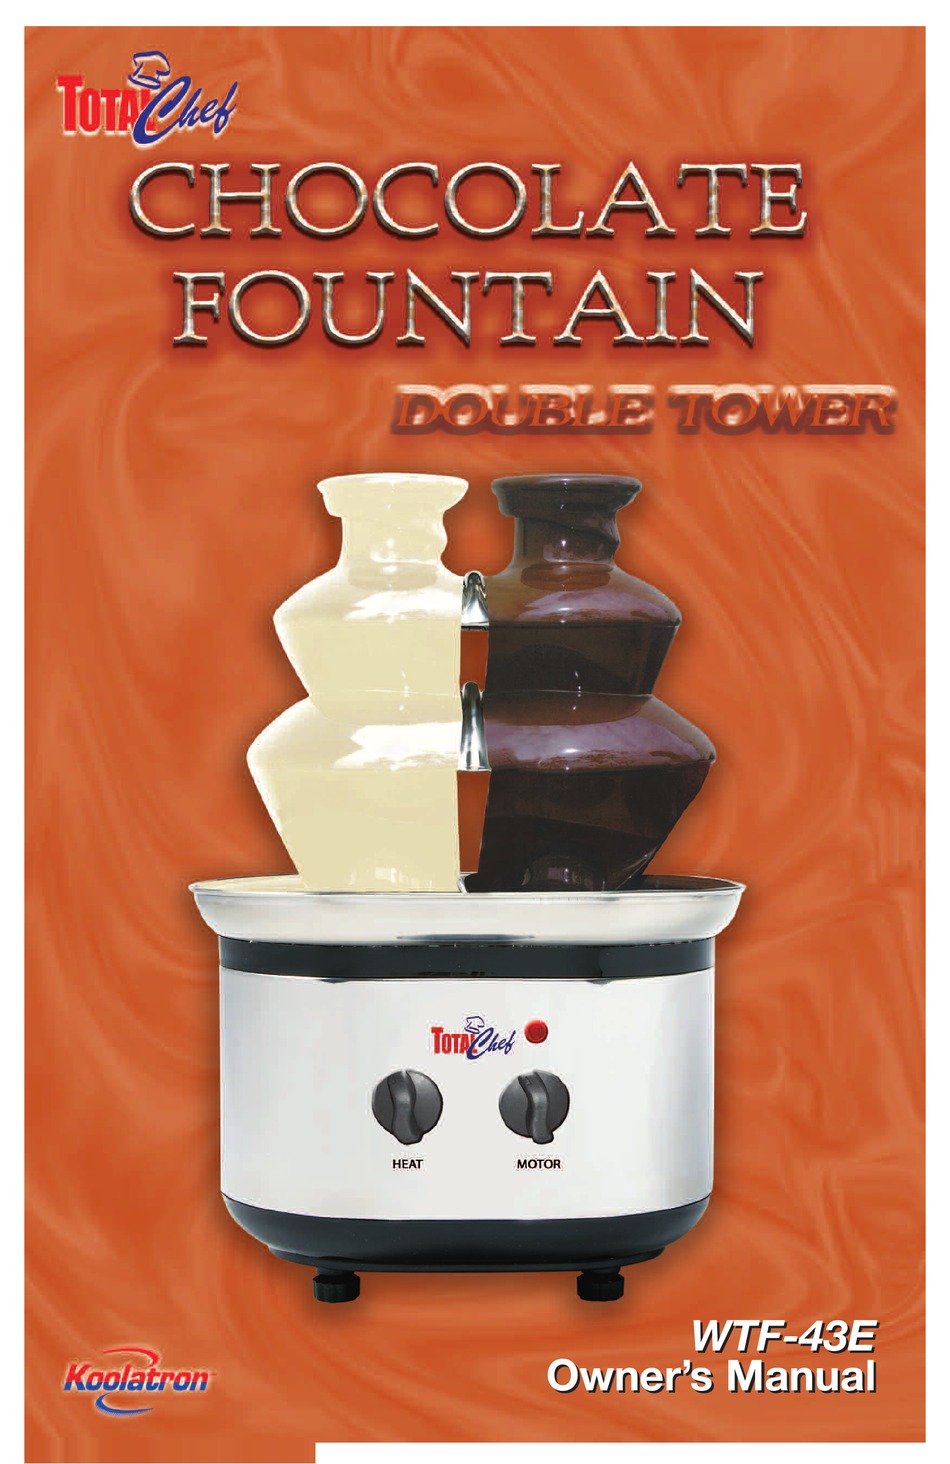 Total Chef WTF-43 Stainless-Steel Double-Tower Chocolate Fountain 